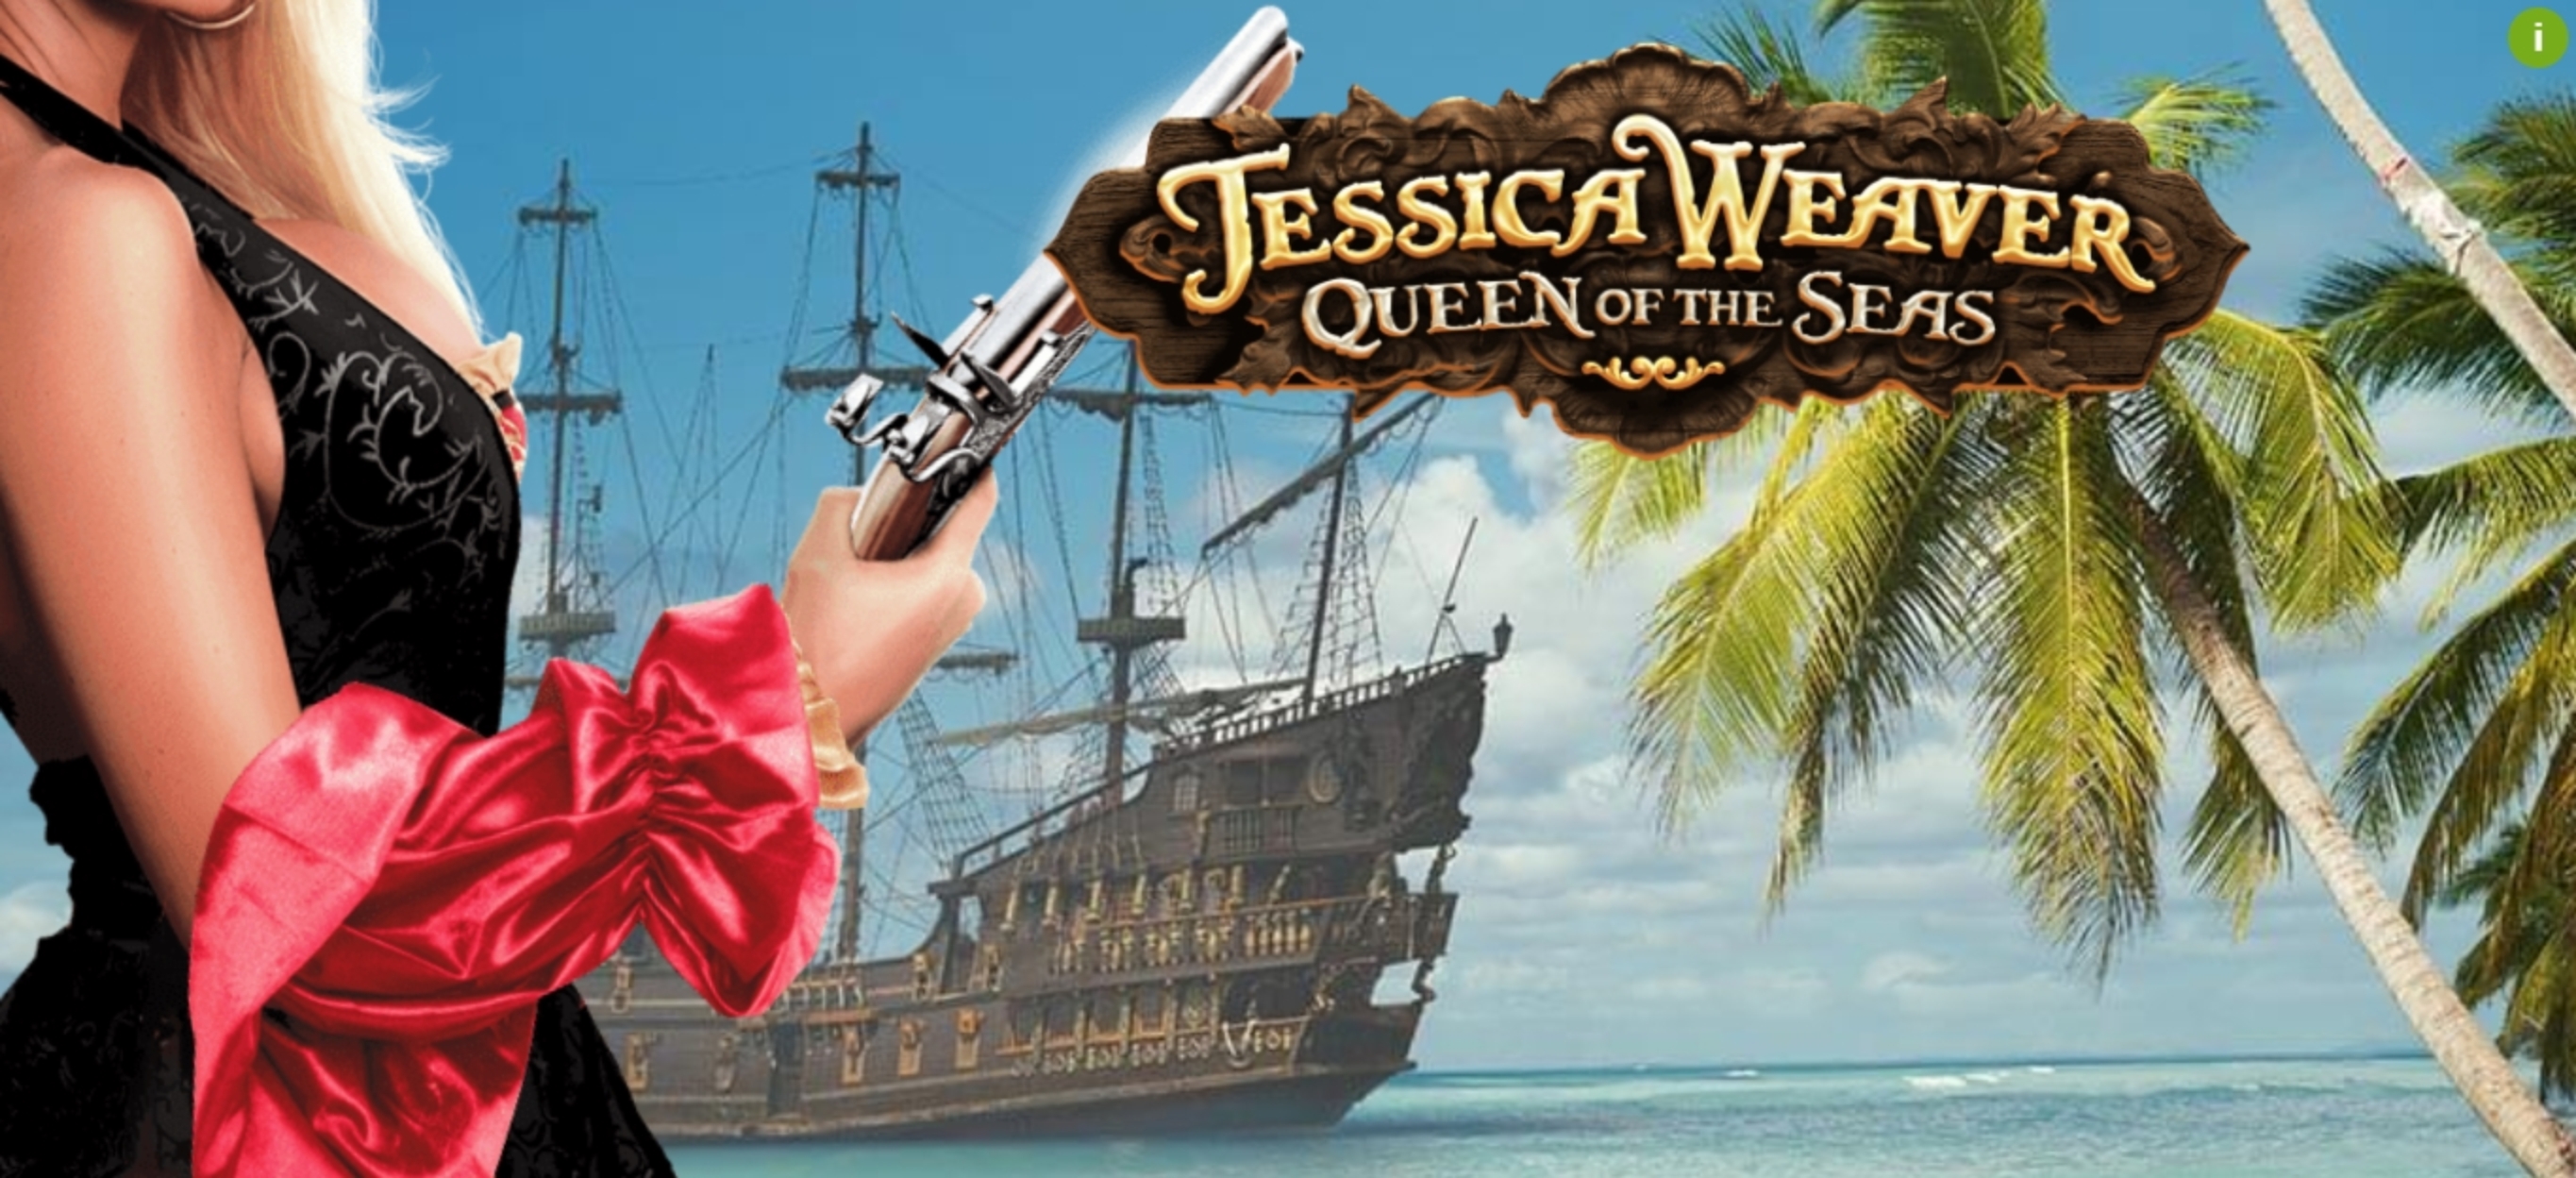 The Jessica Weaver Queen of the Seas Online Slot Demo Game by MGA